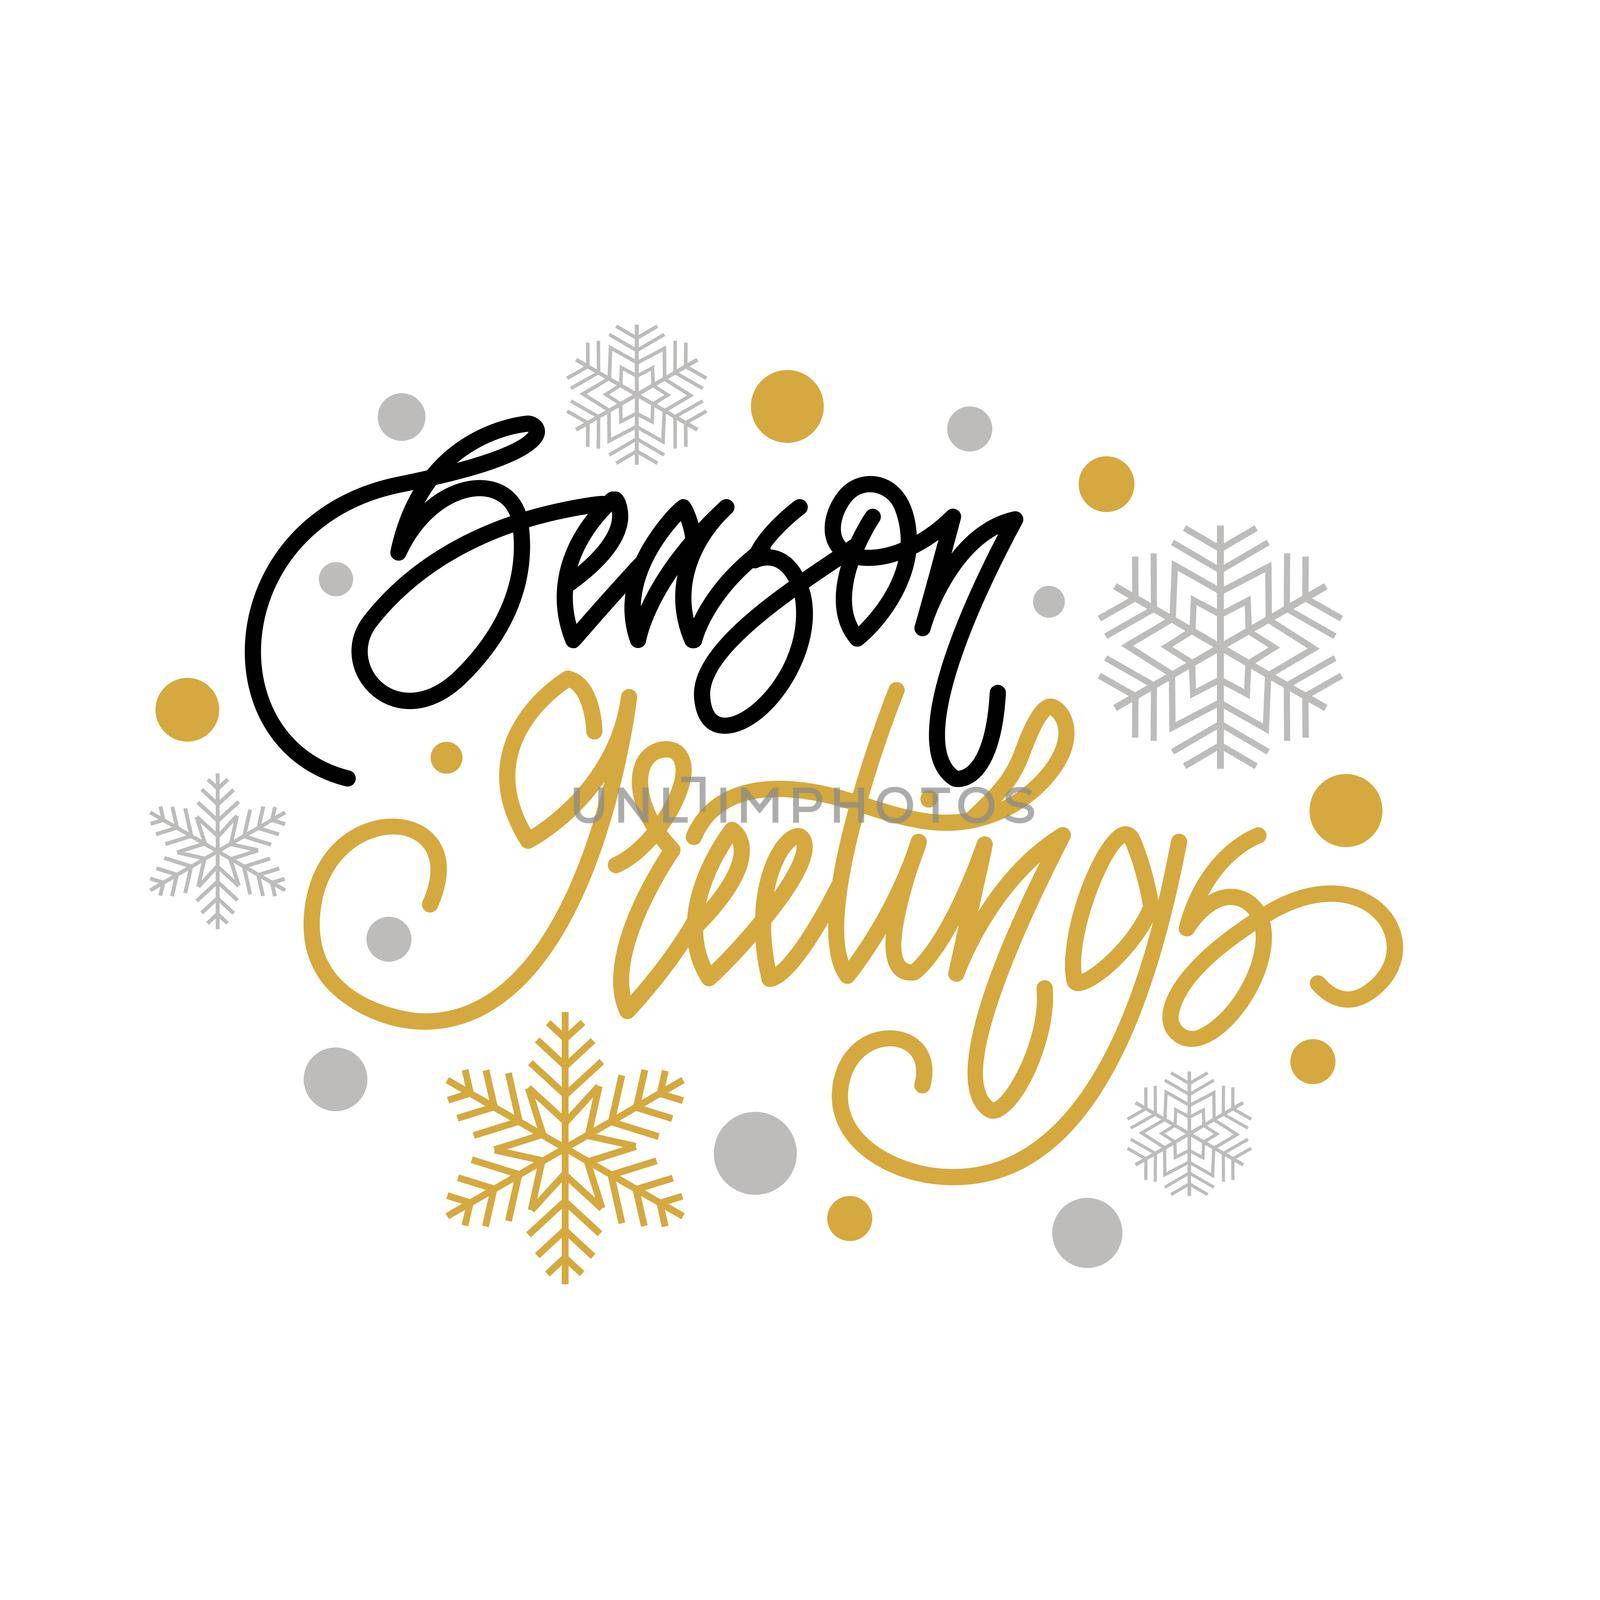 Season greetings. Handwritten lettering isolated on white background. illustration for greeting cards, posters and much more.